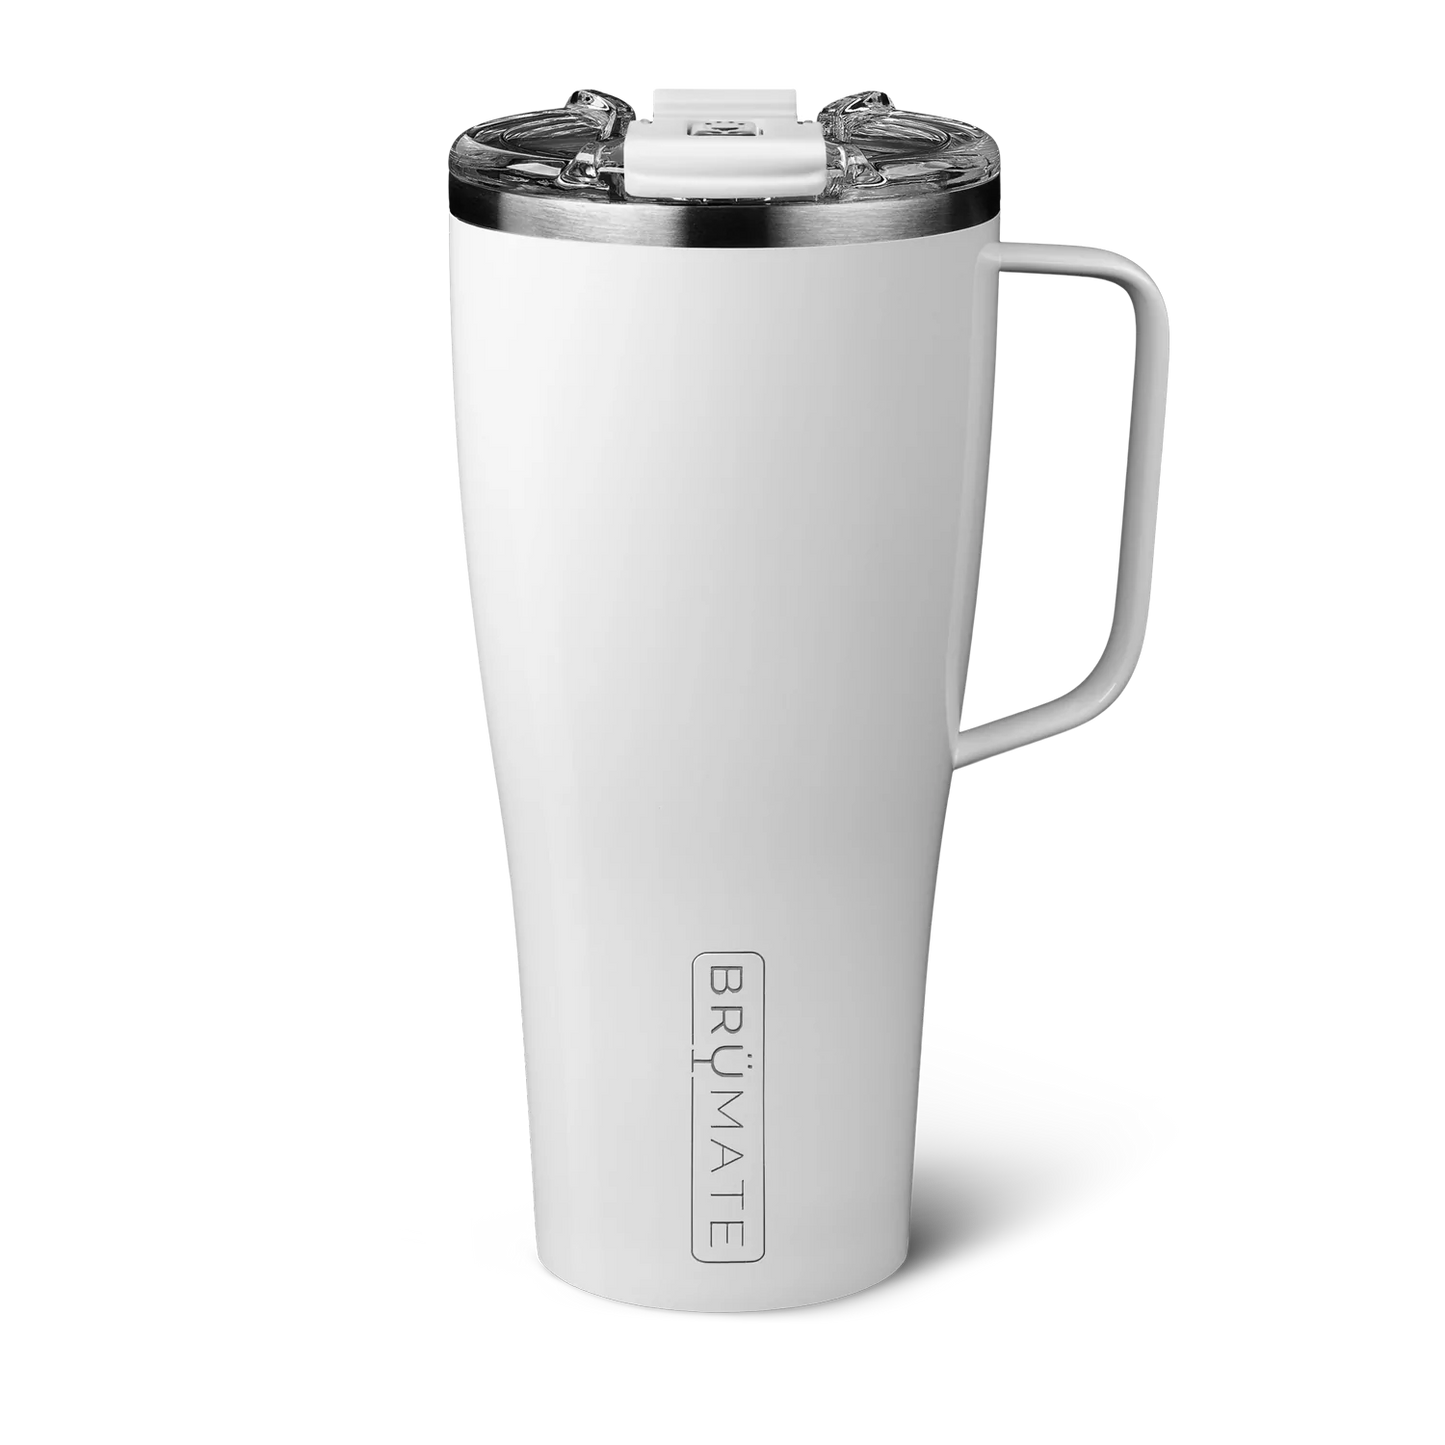 Brumate Toddy XL Drinkware in Ice White at Wrapsody